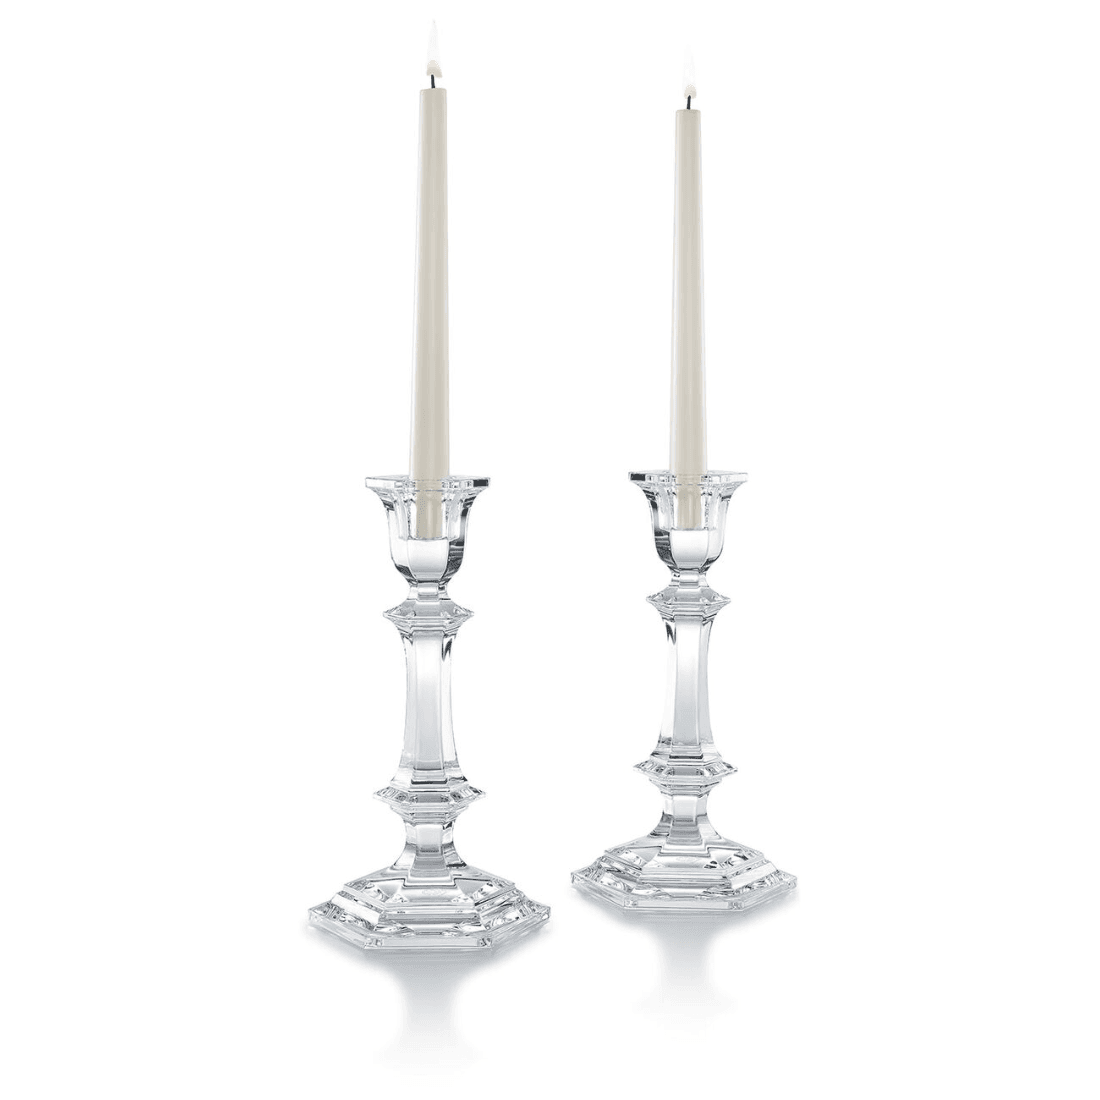 Baccarat Harcourt Candlesticks, set of two